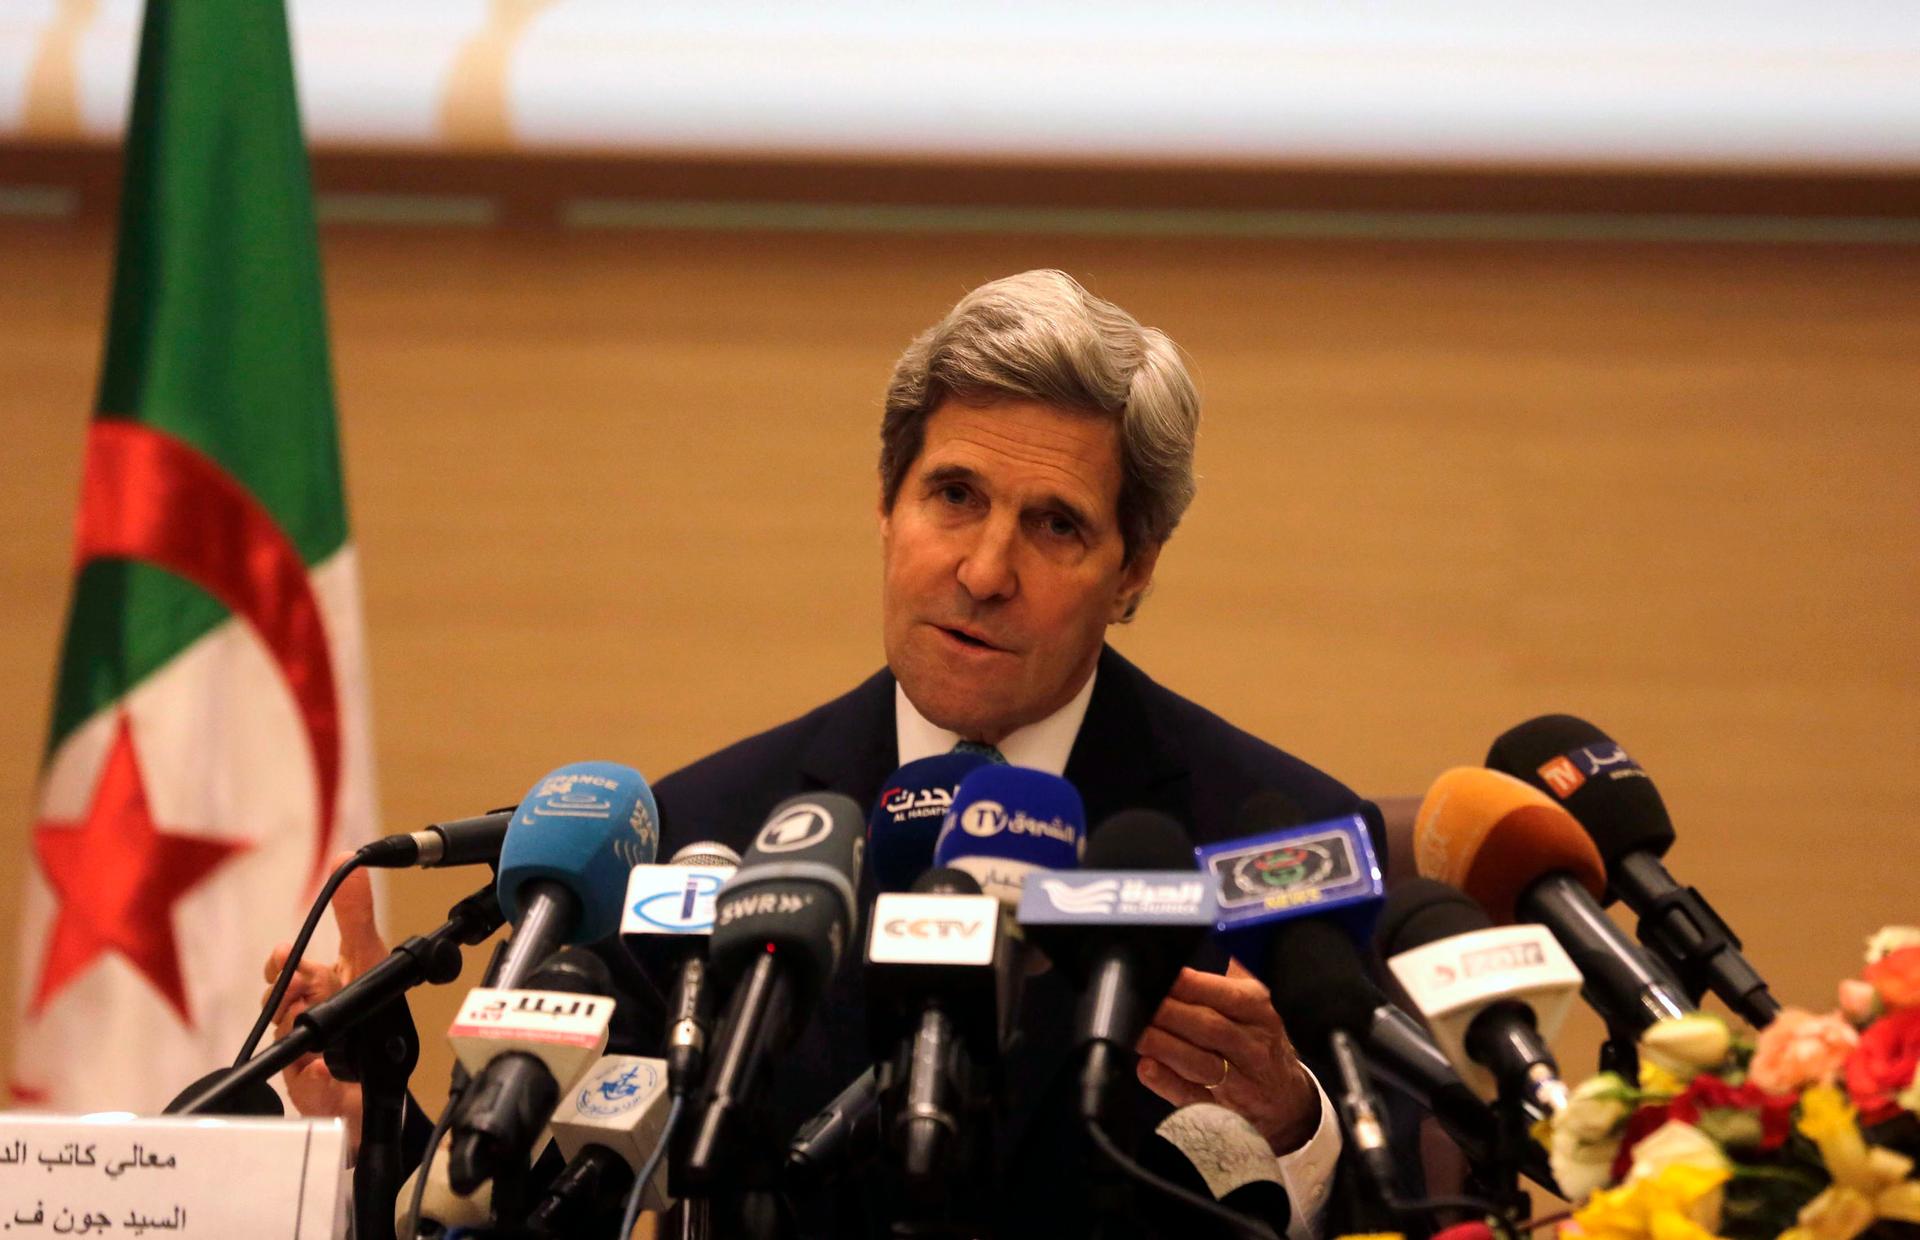 U.S. Secretary of State John Kerry addresses a news conference at the foreign ministry in the Algerian capital of Algiers on April 3, 2014.